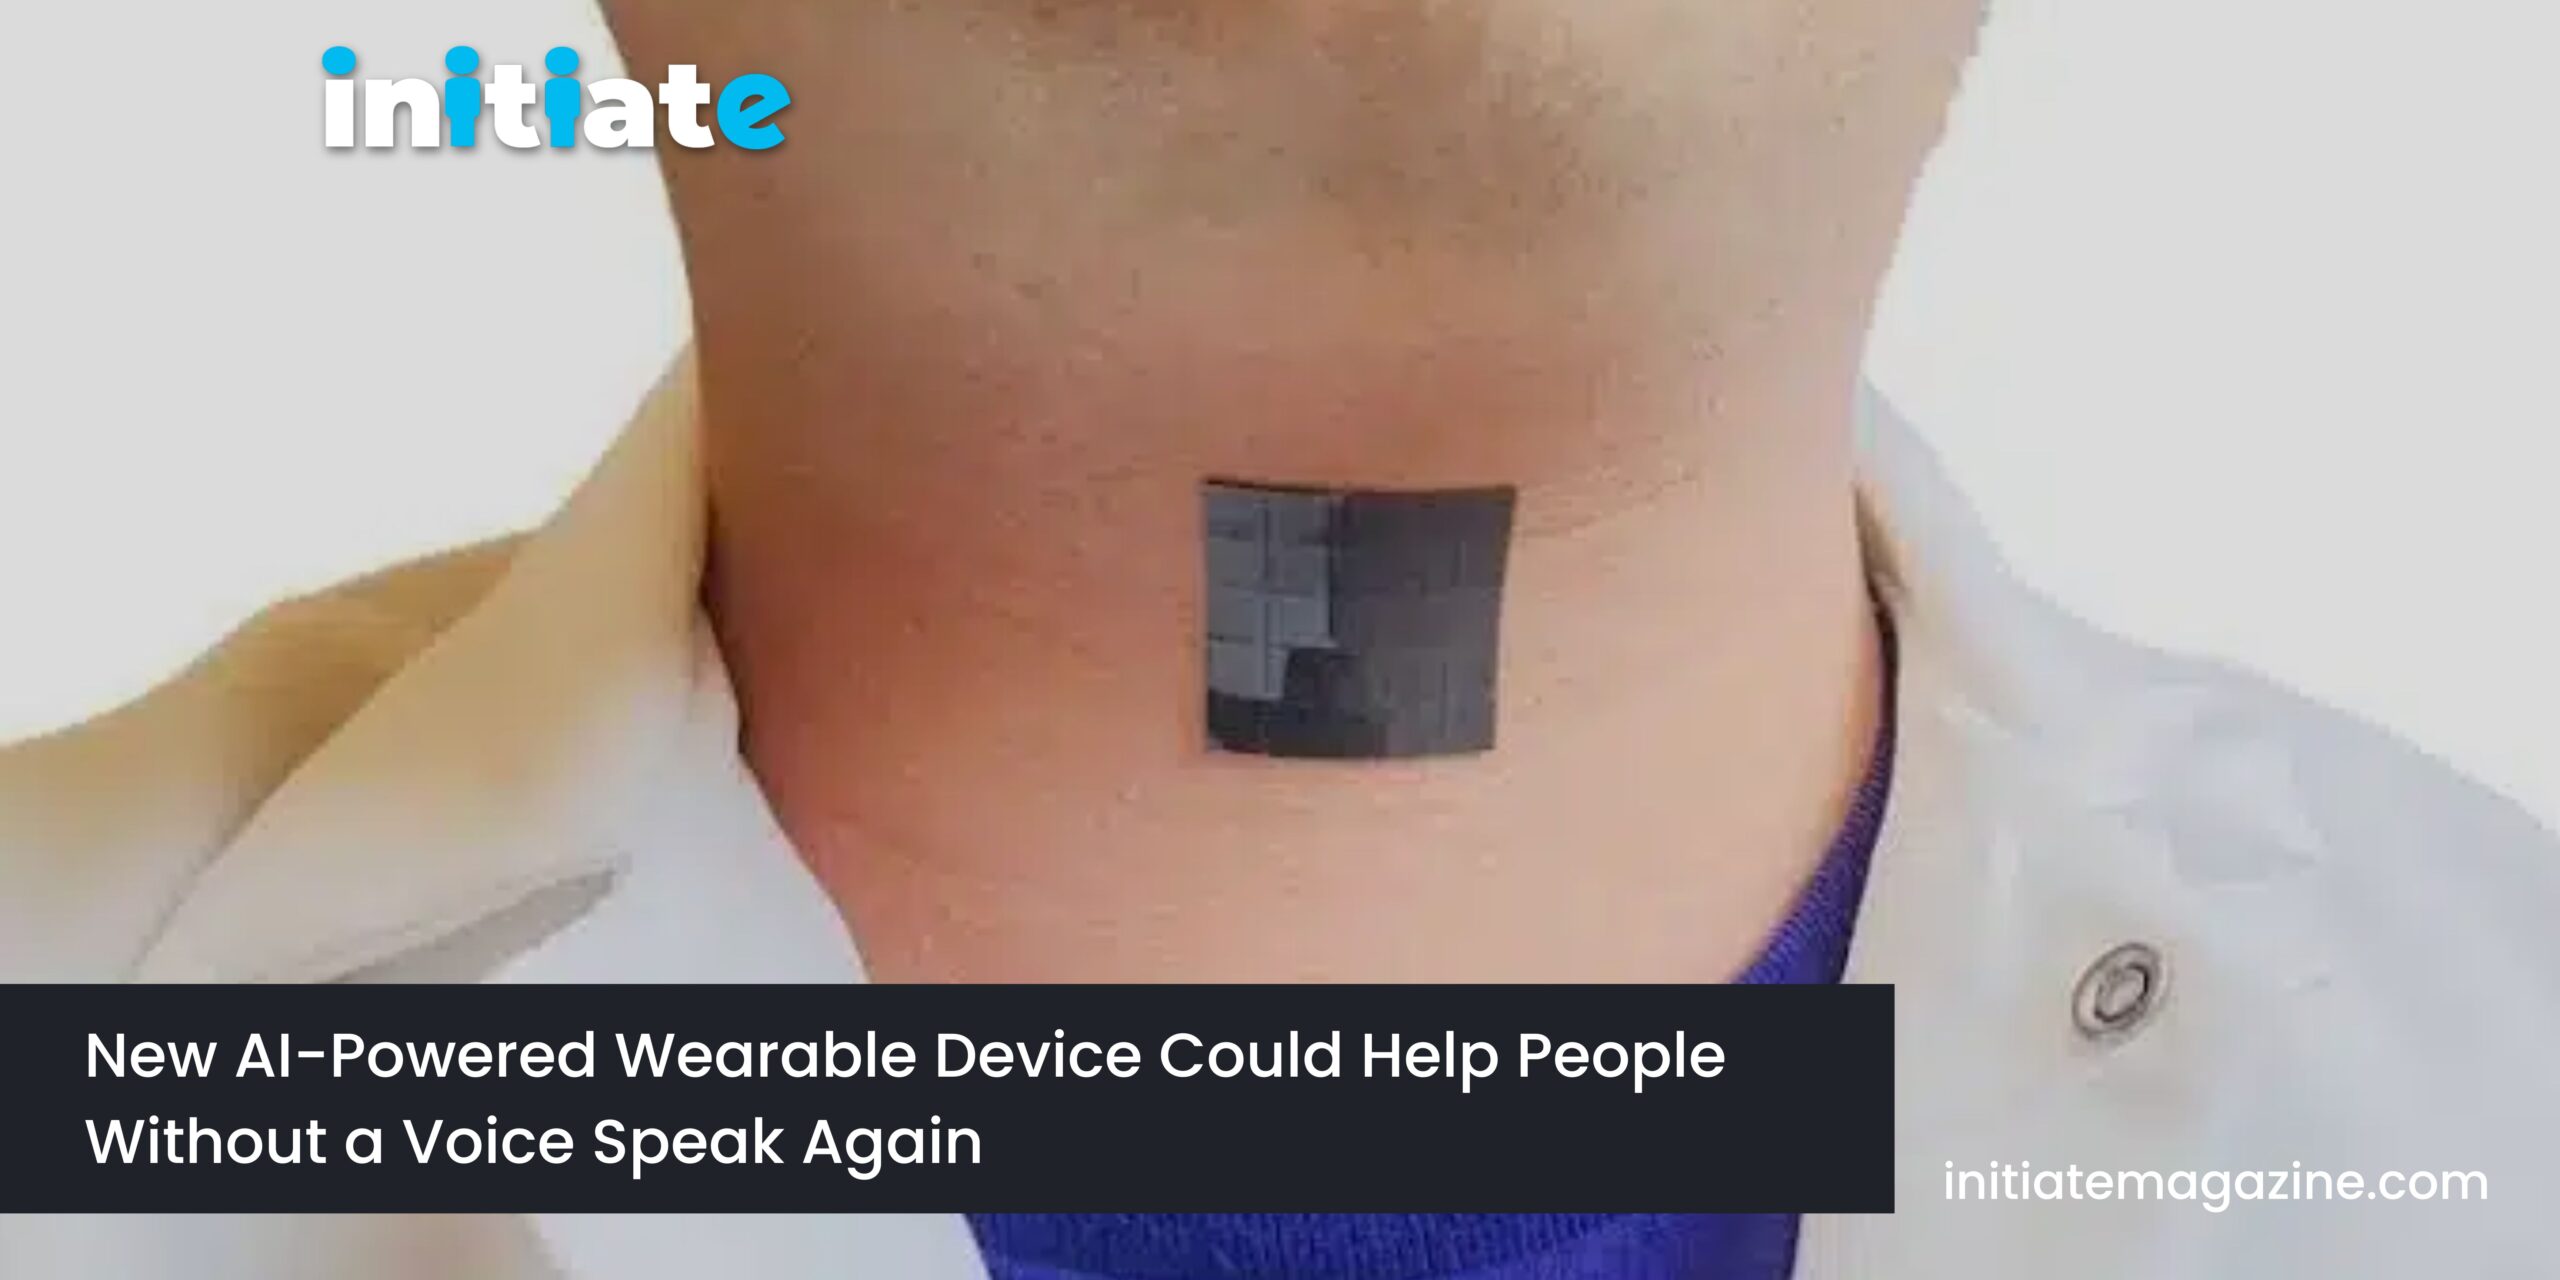 New AI-Powered Wearable Device Could Help People Without a Voice Speak Again